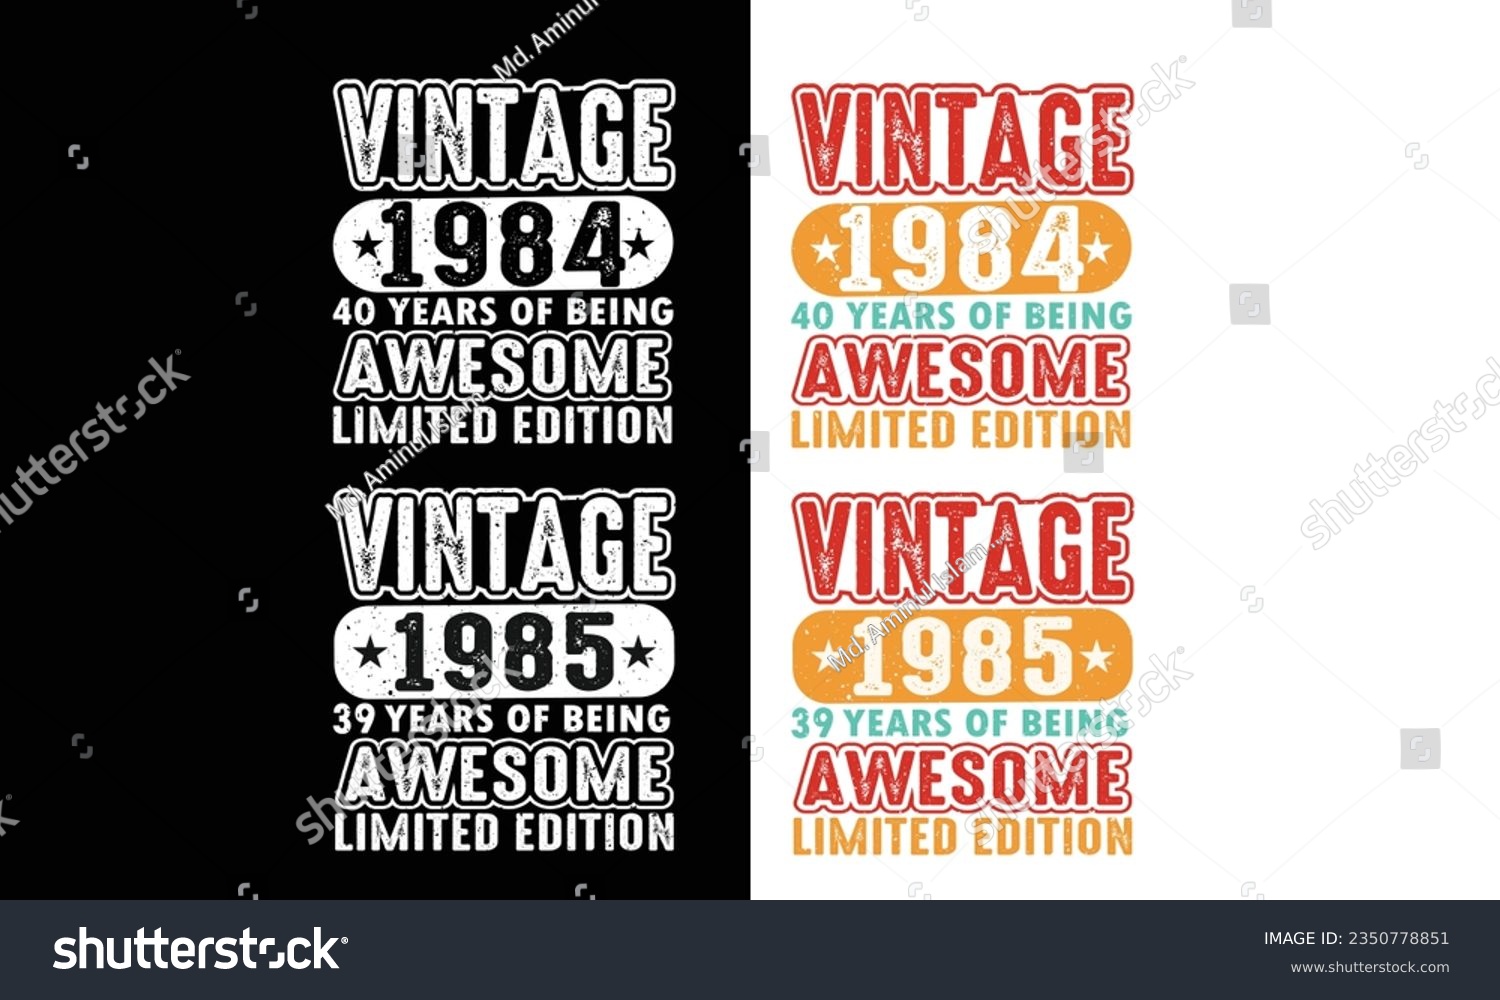 SVG of Vintage 39 and 40 years being awesome limited edition-39 years birthday shirt.Birthday gift.  svg